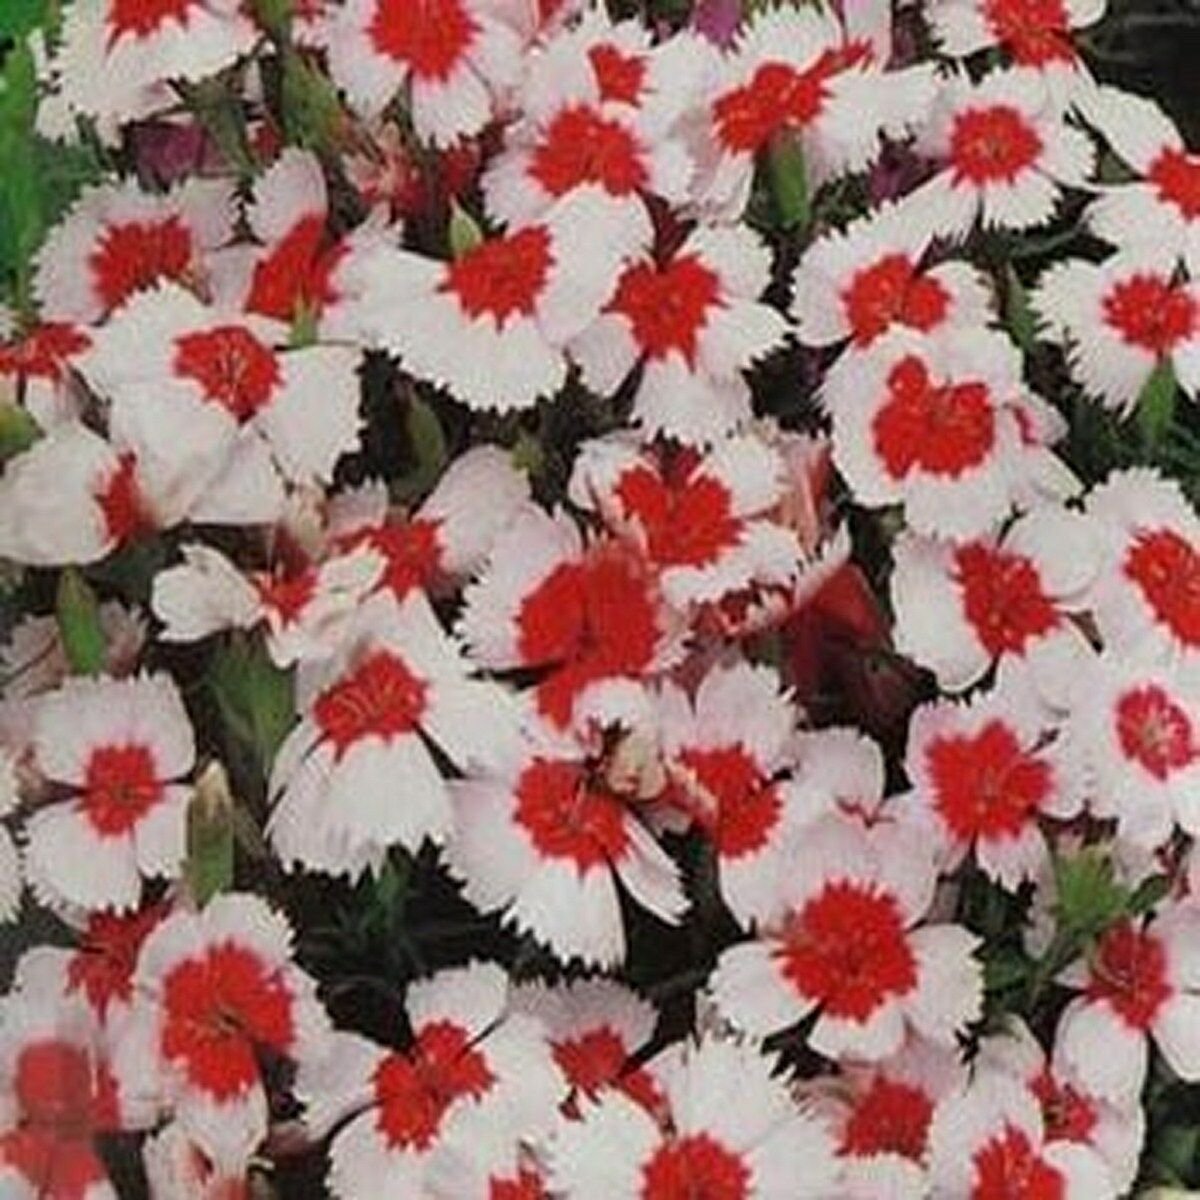 Dianthus- Chinensis- Merry-Go-Round- 50 Seeds